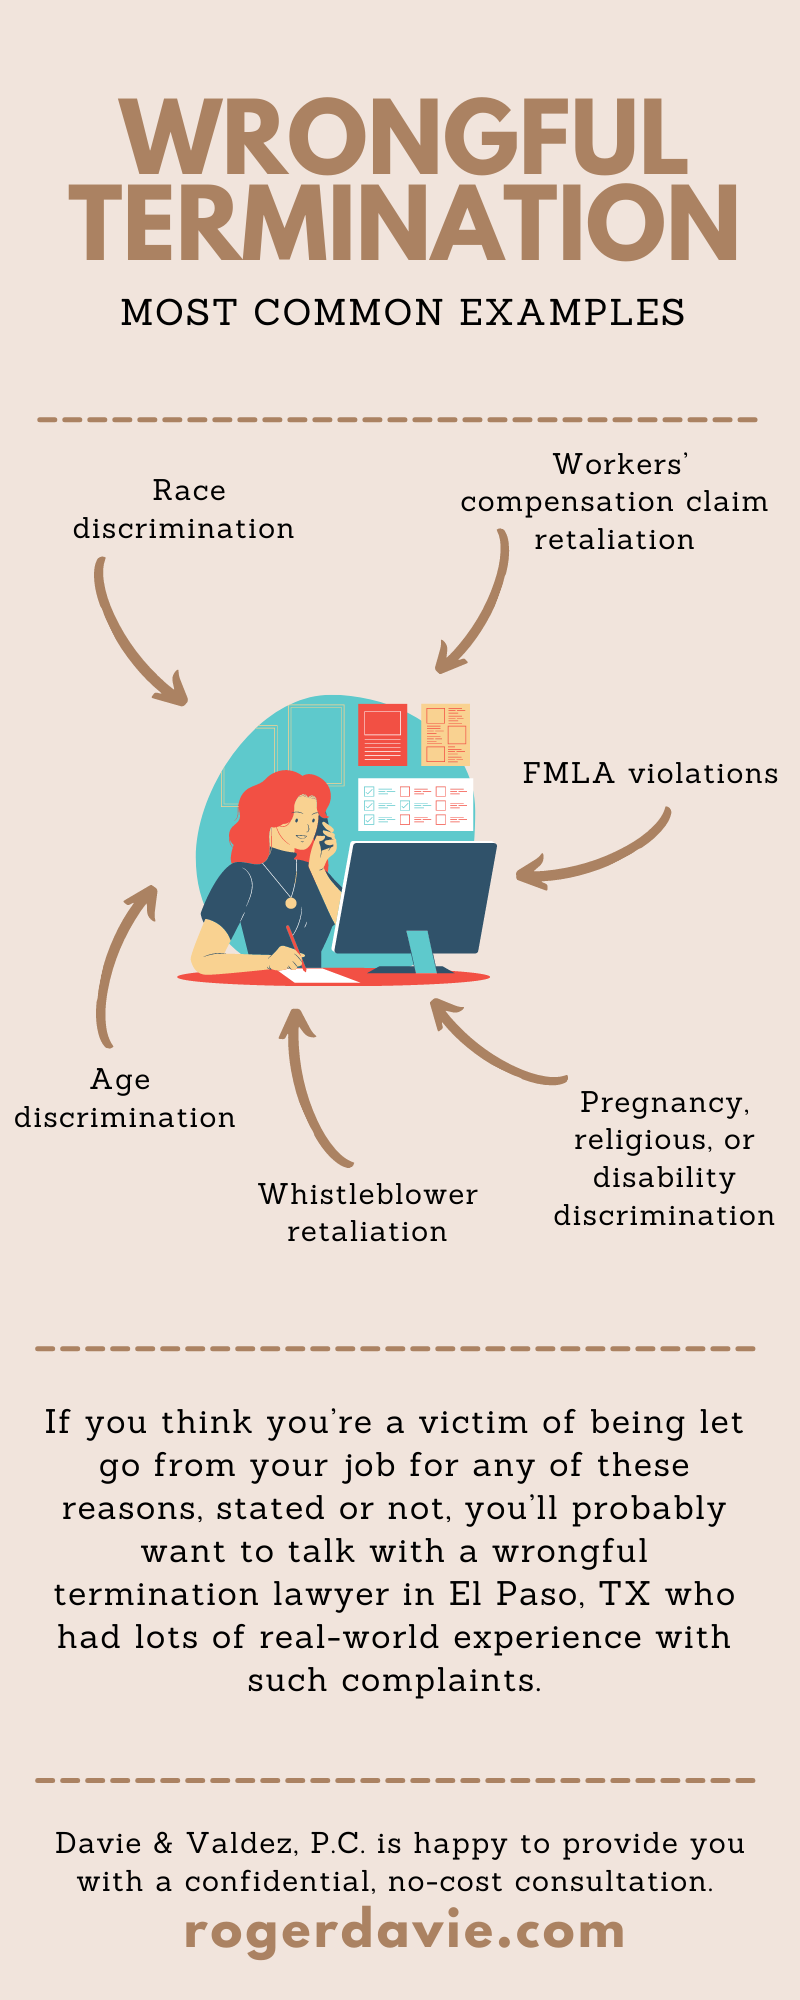 Wrongful Termination Infographic